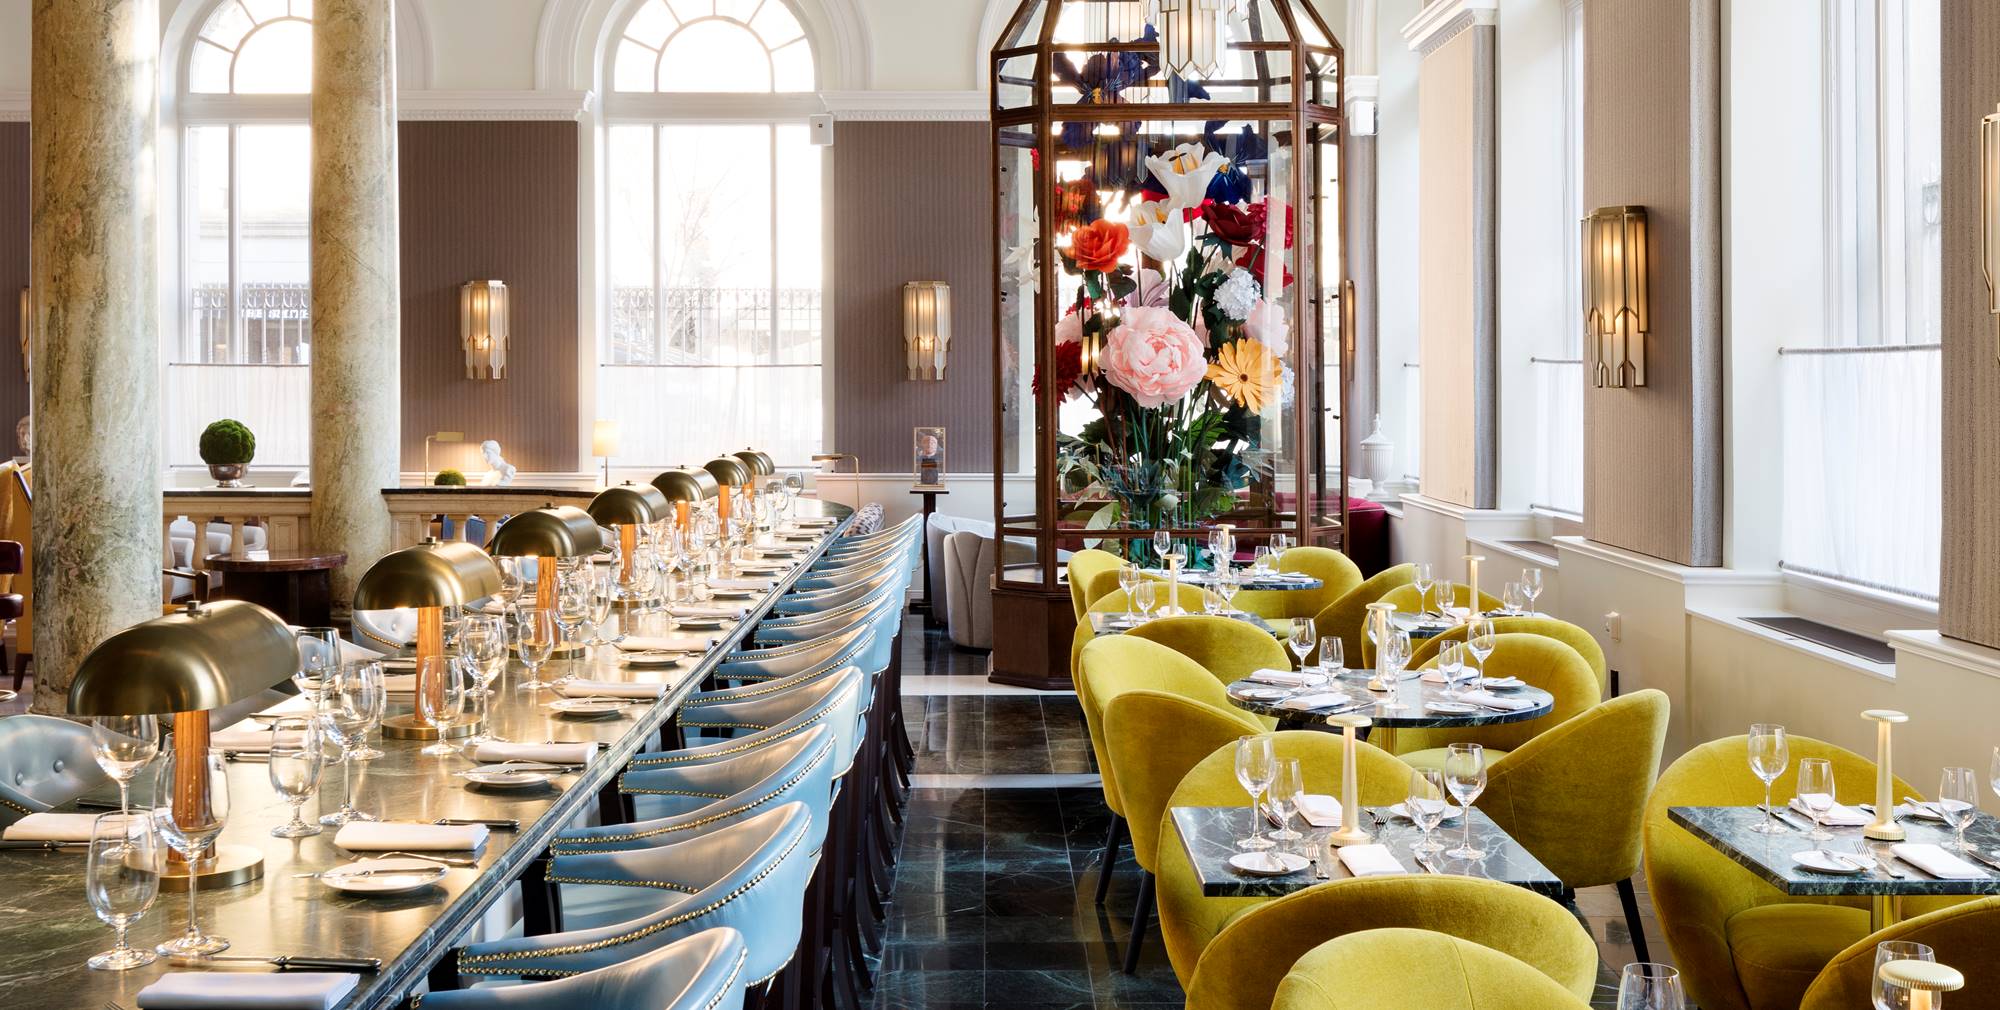 What's on the Menu at Louis Vuitton's First Café and Restaurant